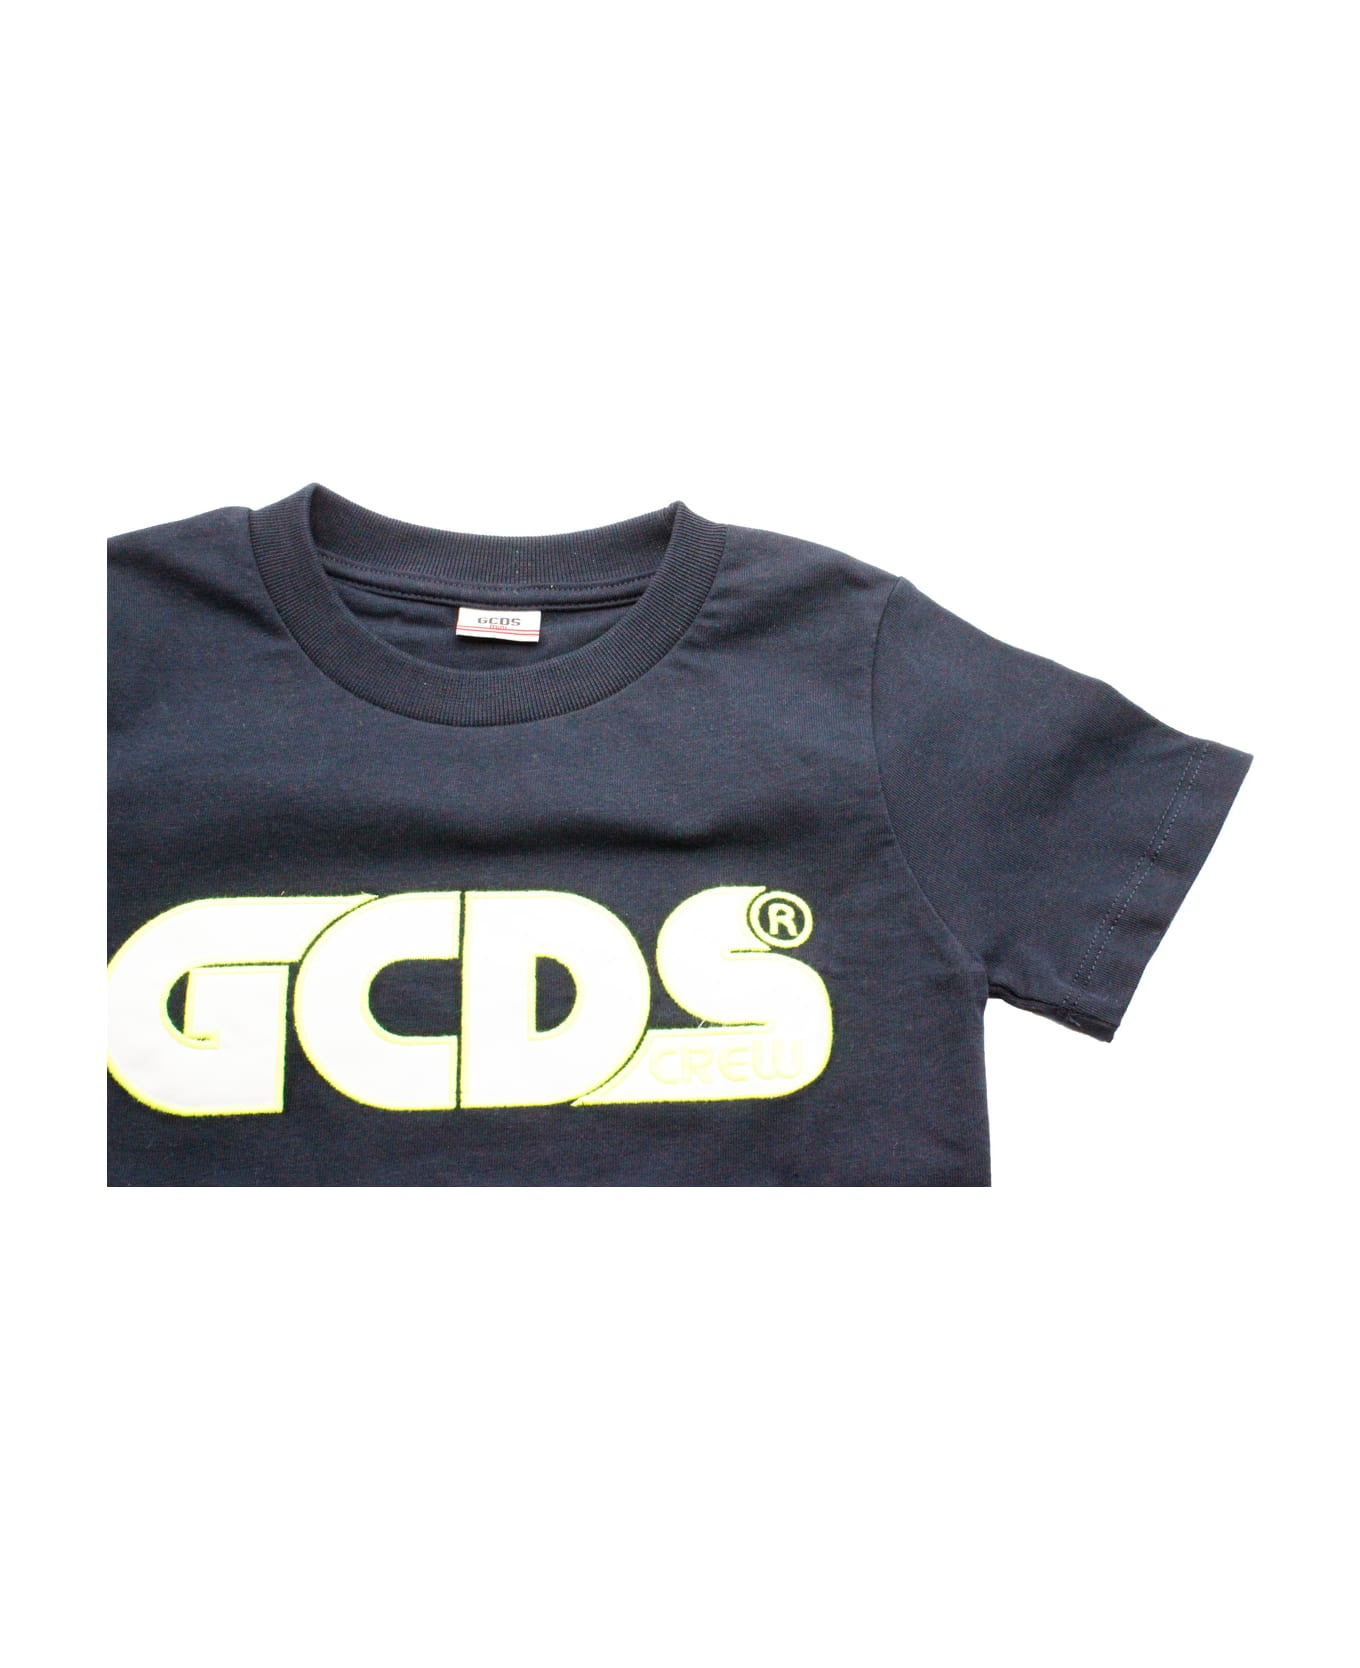 GCDS Short-sleeved Crew Neck T-shirt With Fluorescent Lettering And Profiles - Blu Tシャツ＆ポロシャツ